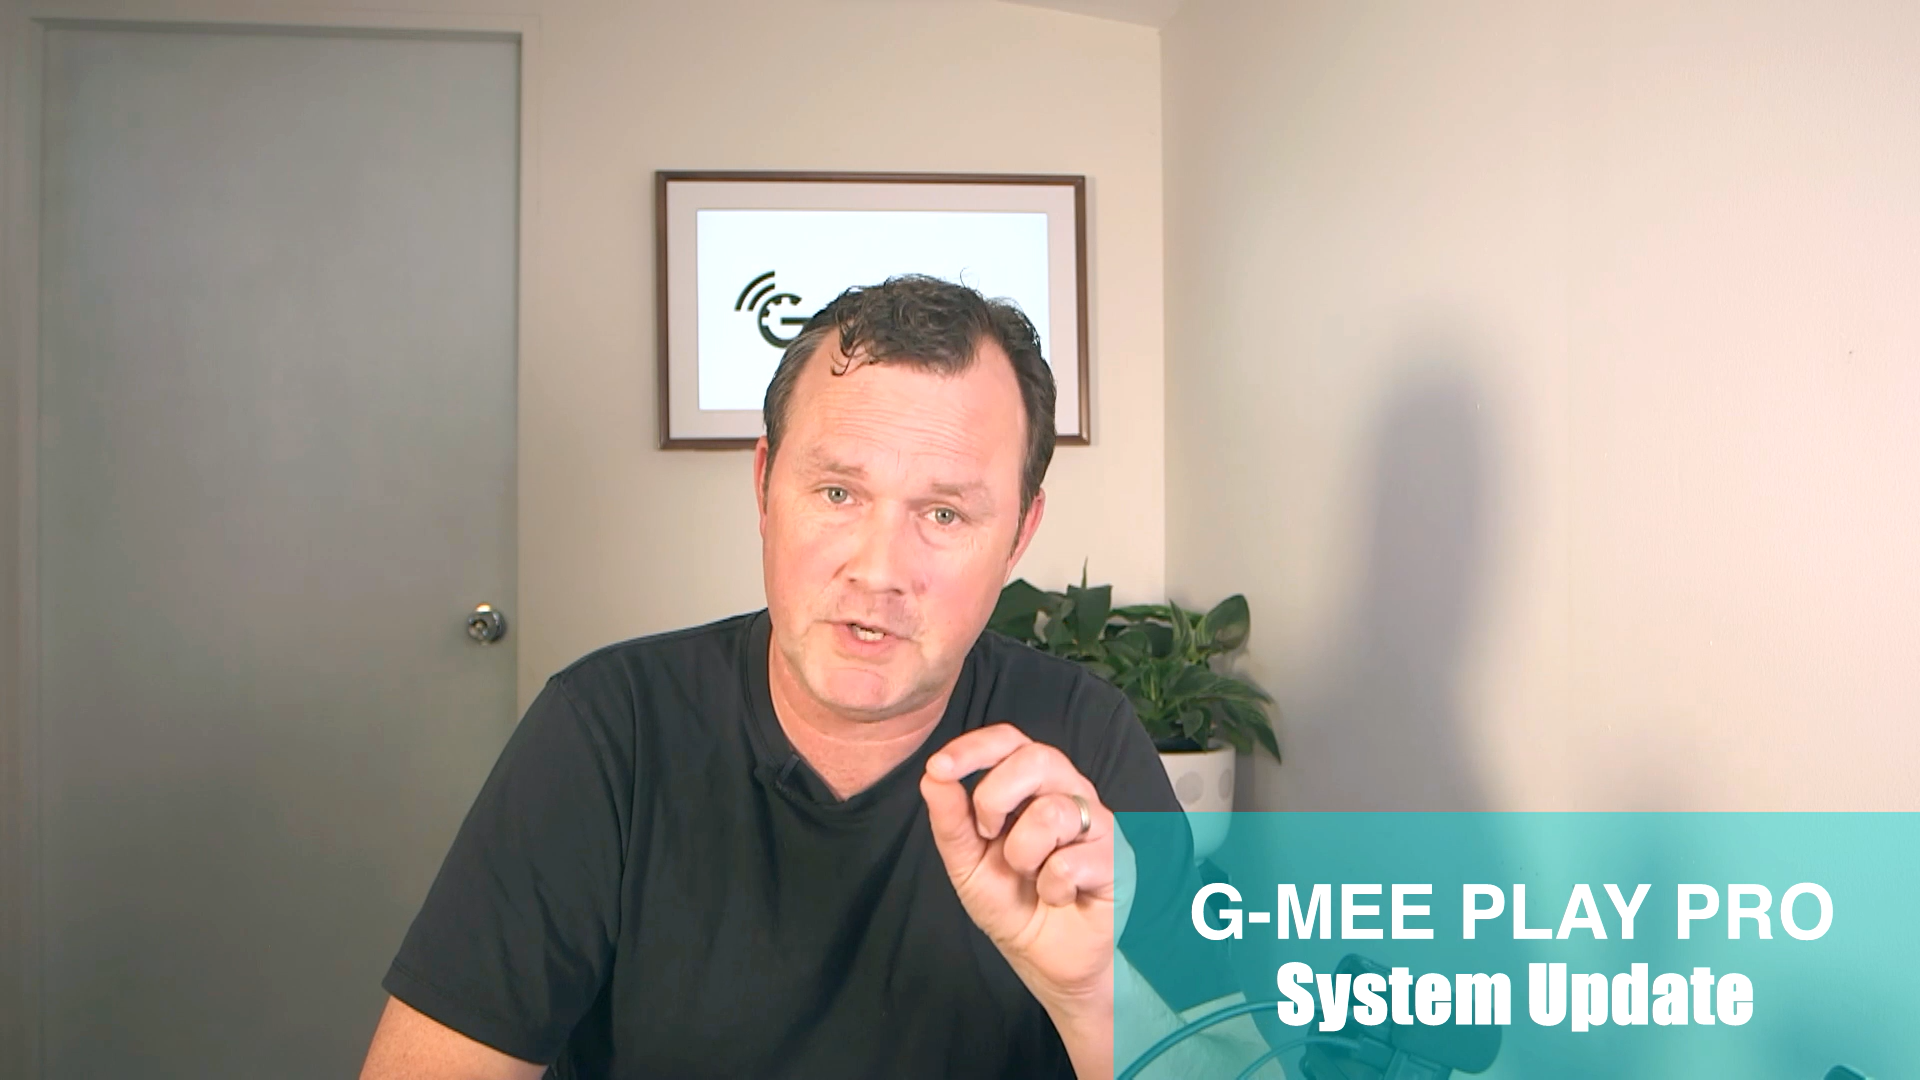 Performing a System Update on your G-mee Play Pro